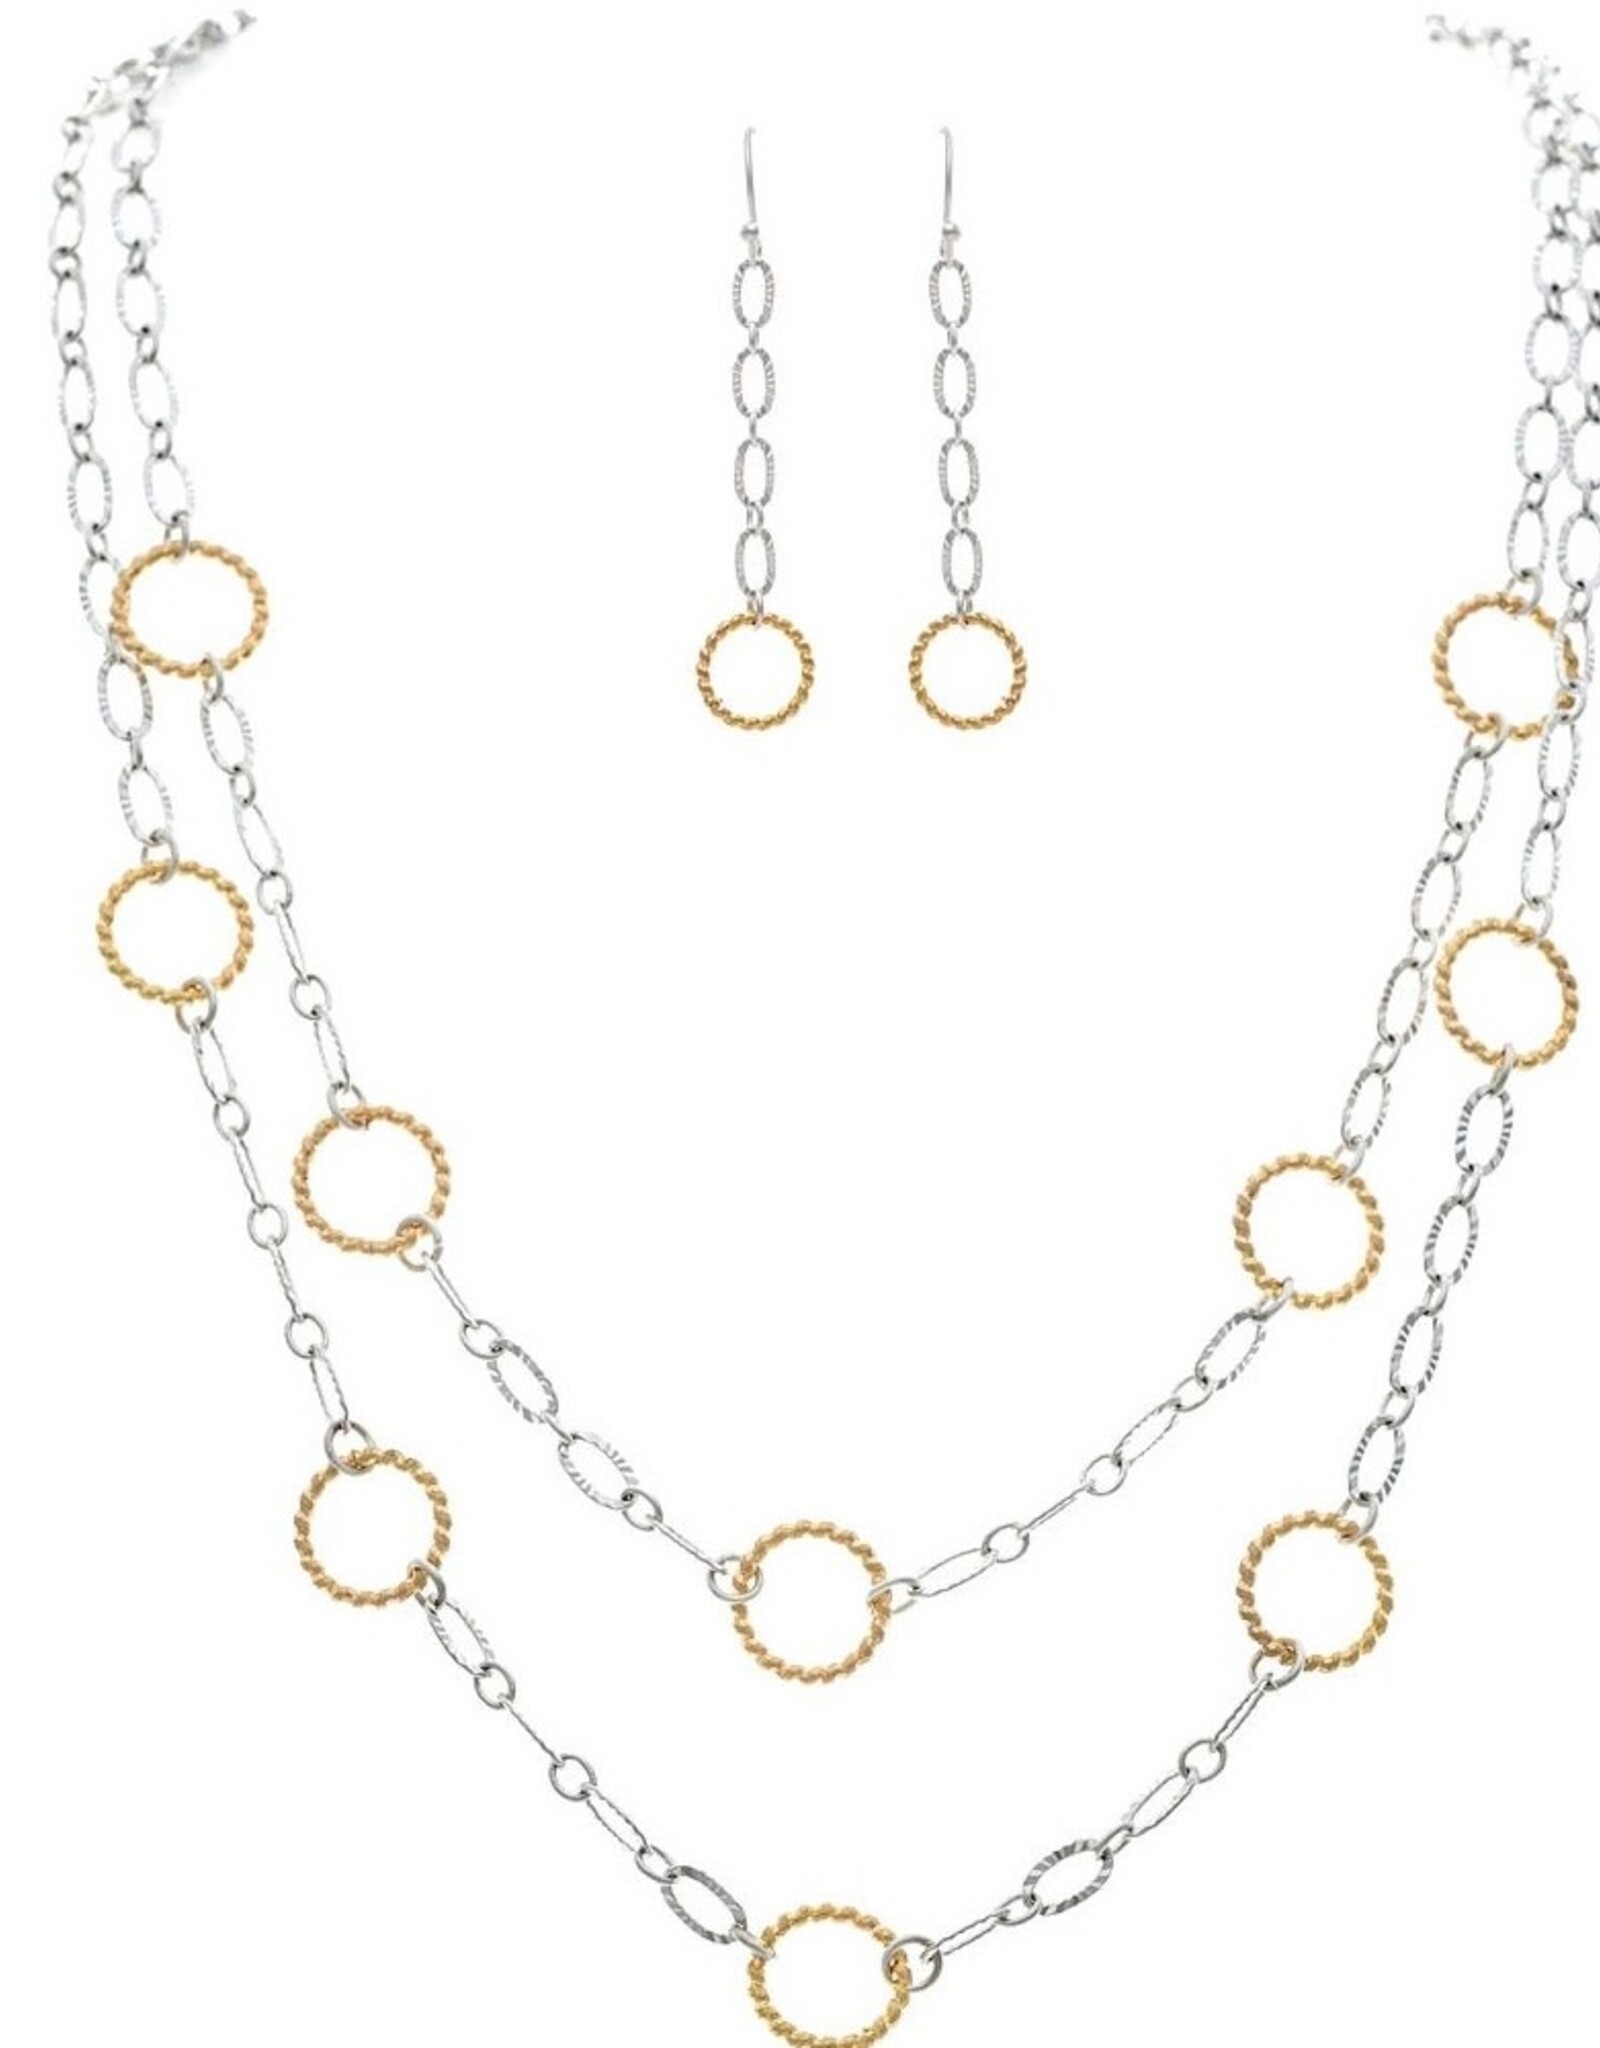 Rain Jewelry TWO TONE LAYER CIRCLES AND CHAIN NECKLACE SET